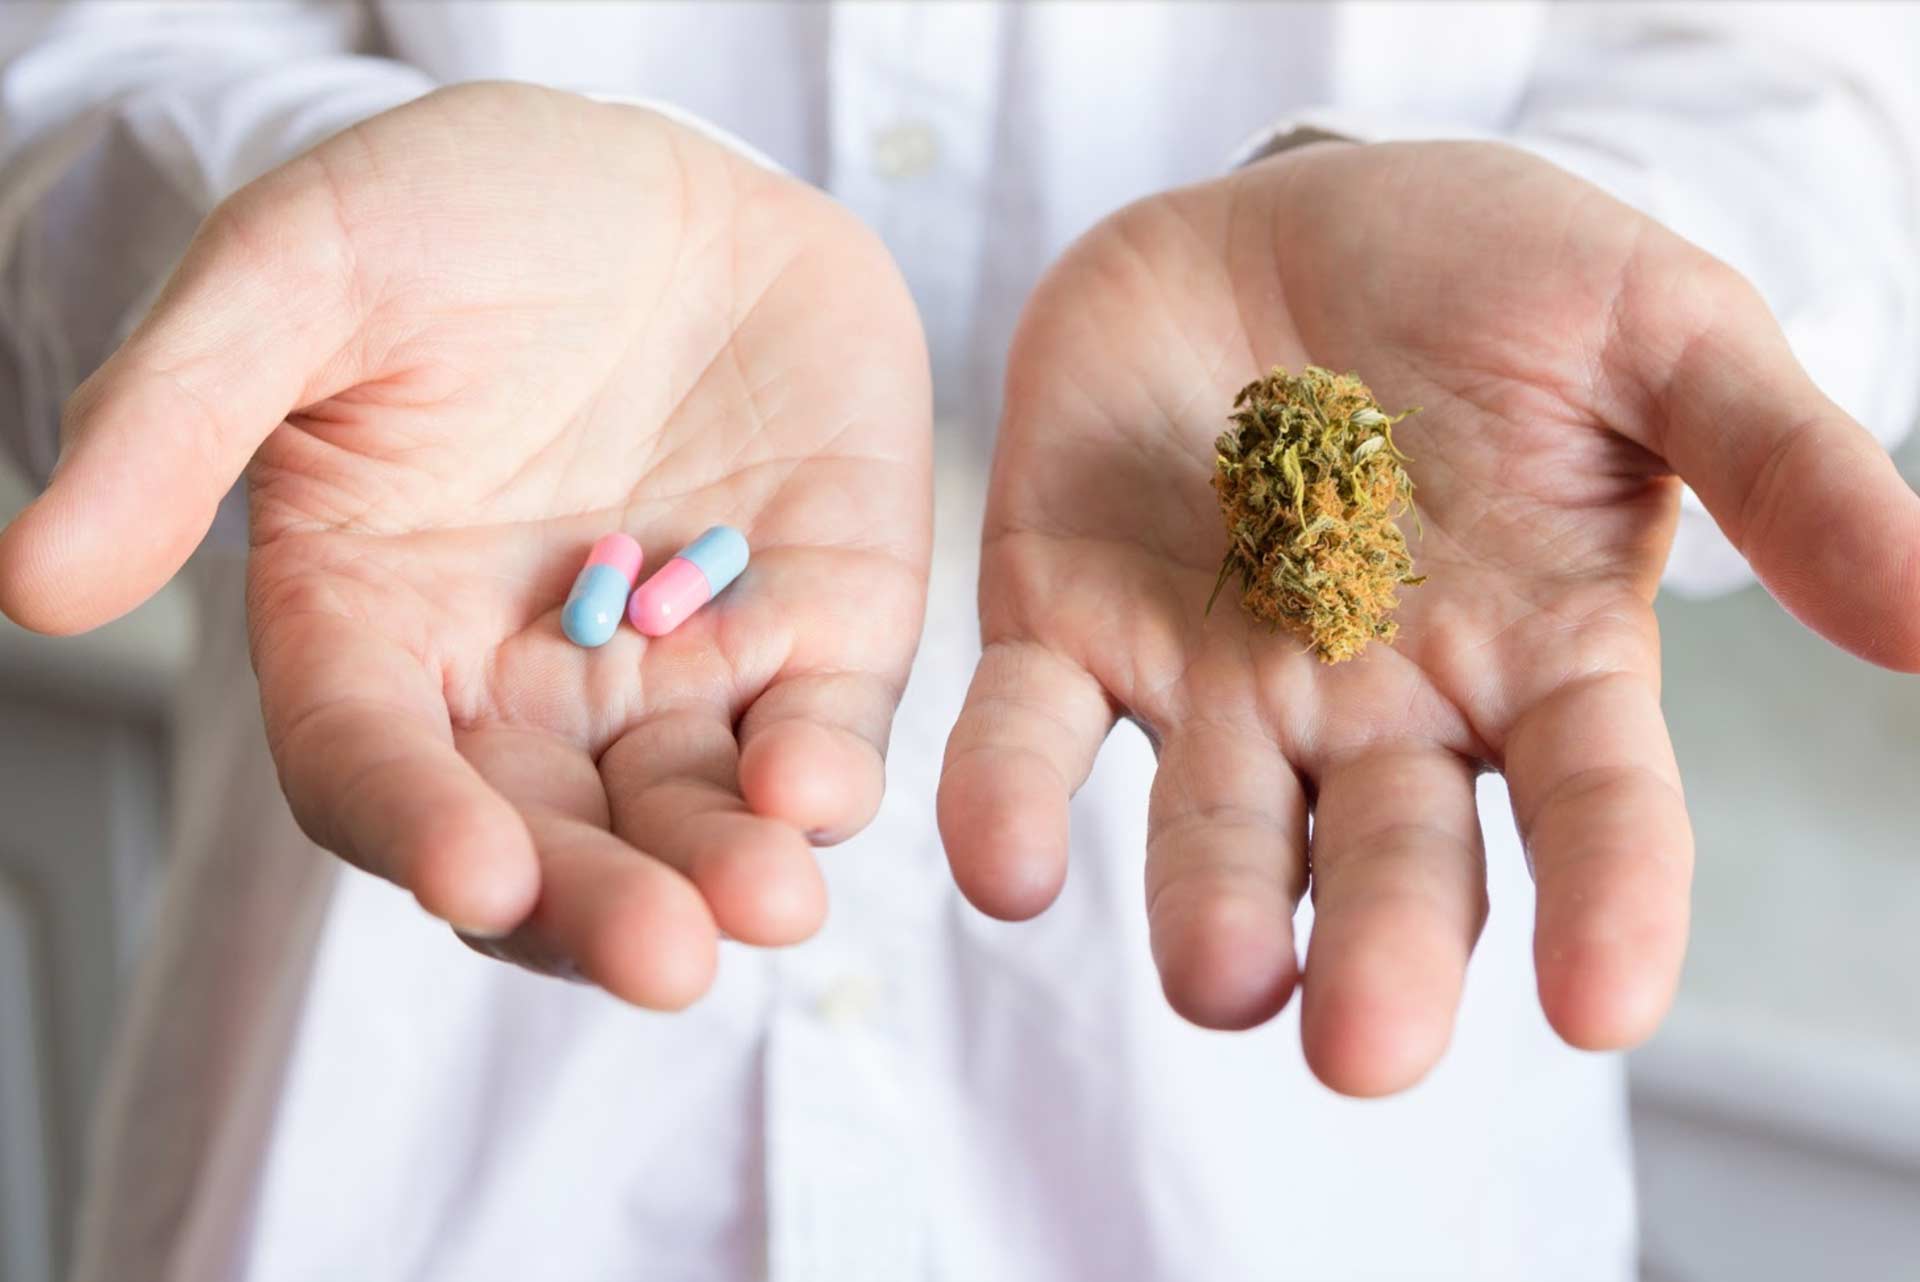 Close-up of clinician’s hands, with one hand holding cannabis flower and the other holding pills, showing different options.